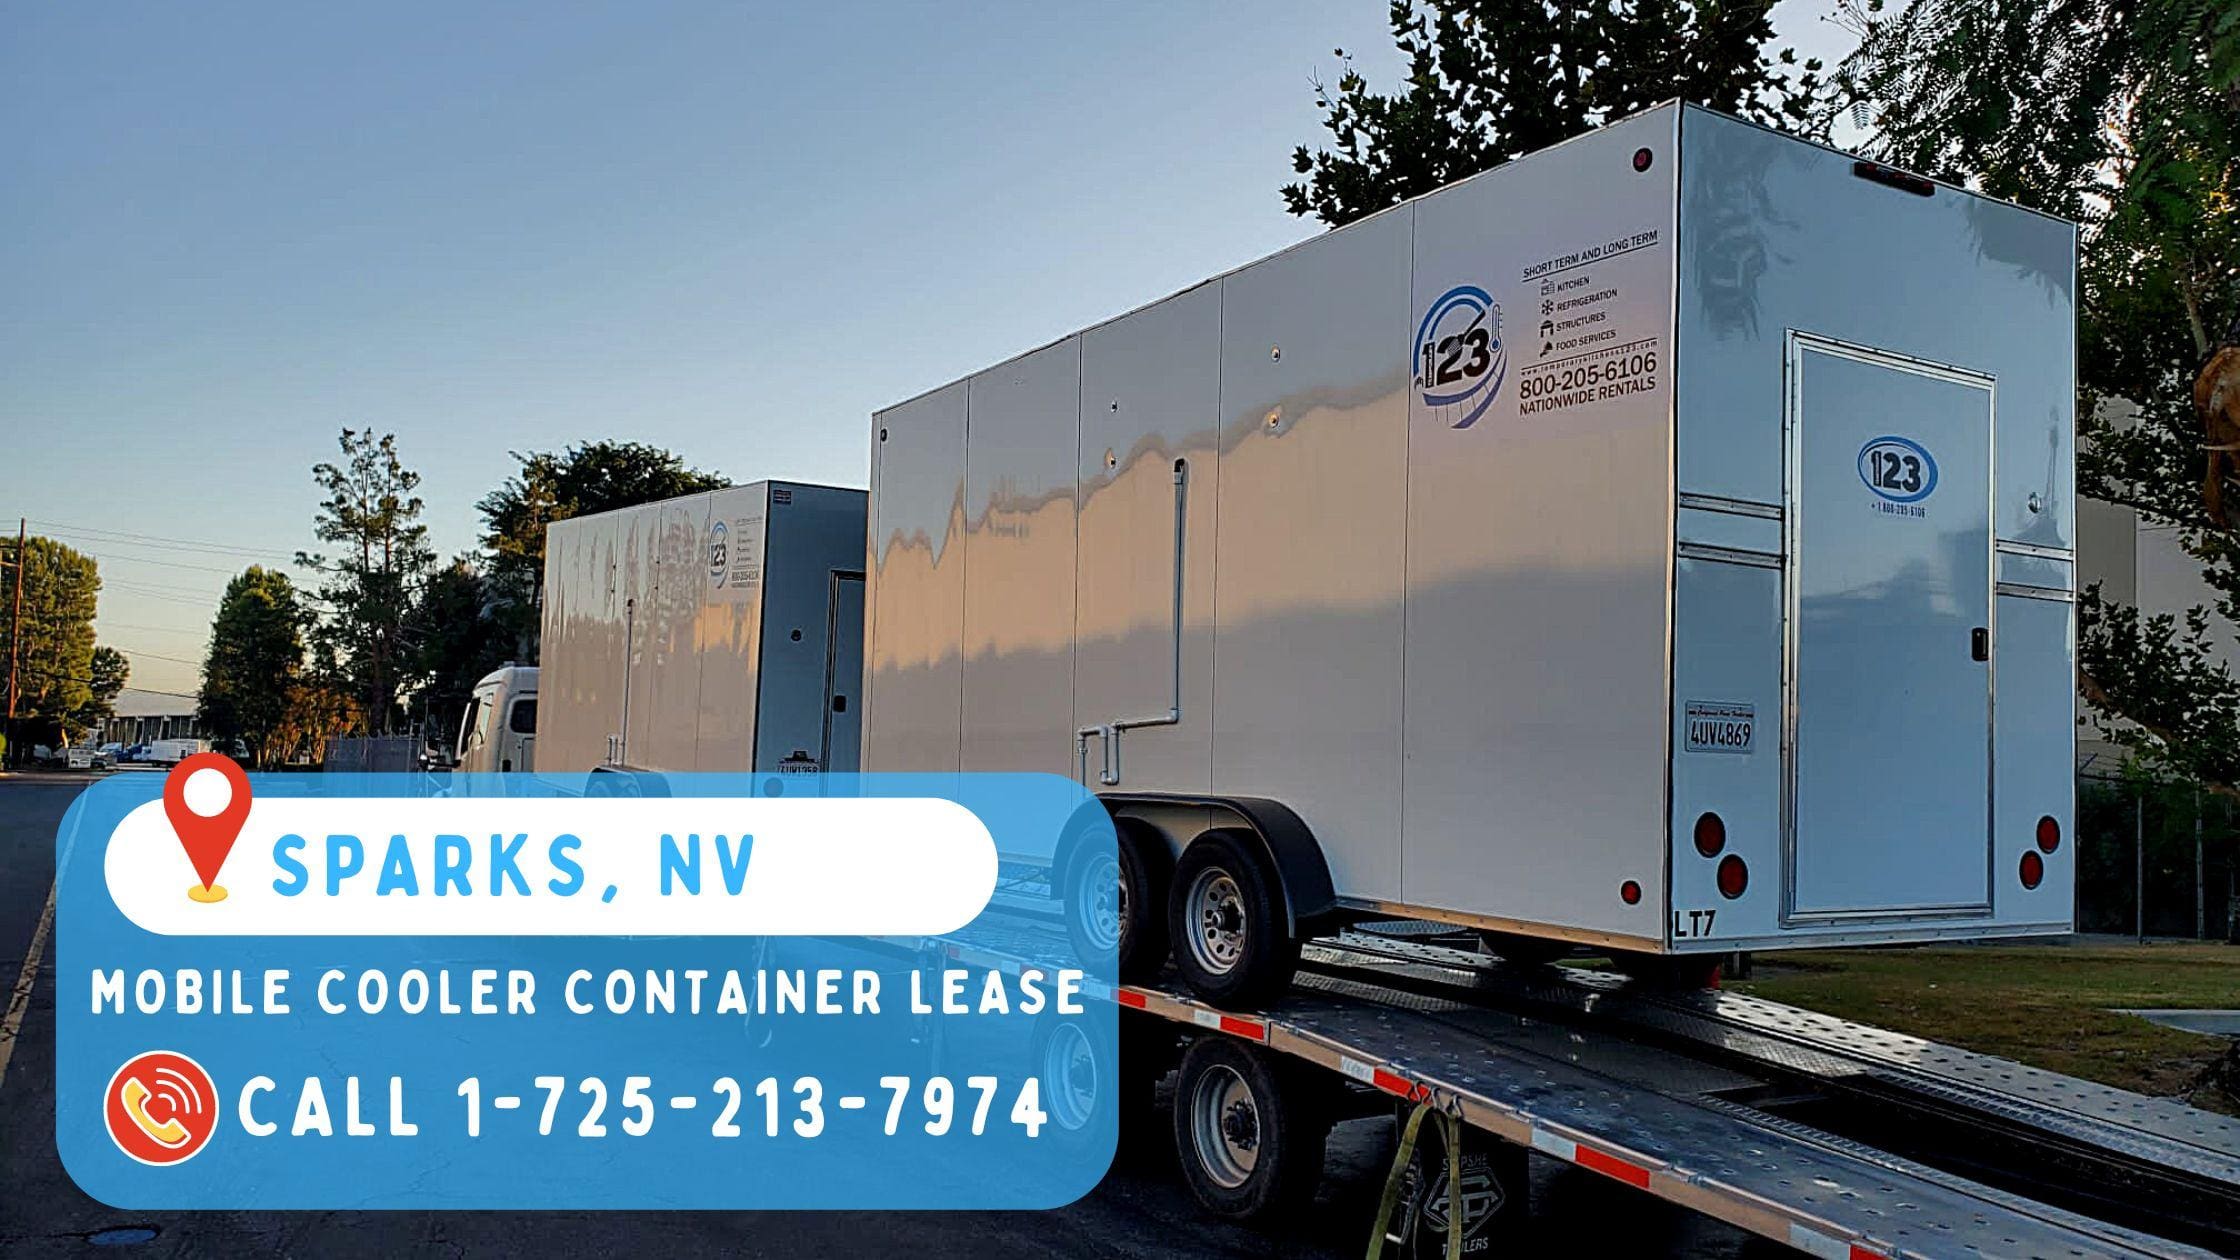 Mobile Cooler Container Lease in Sparks